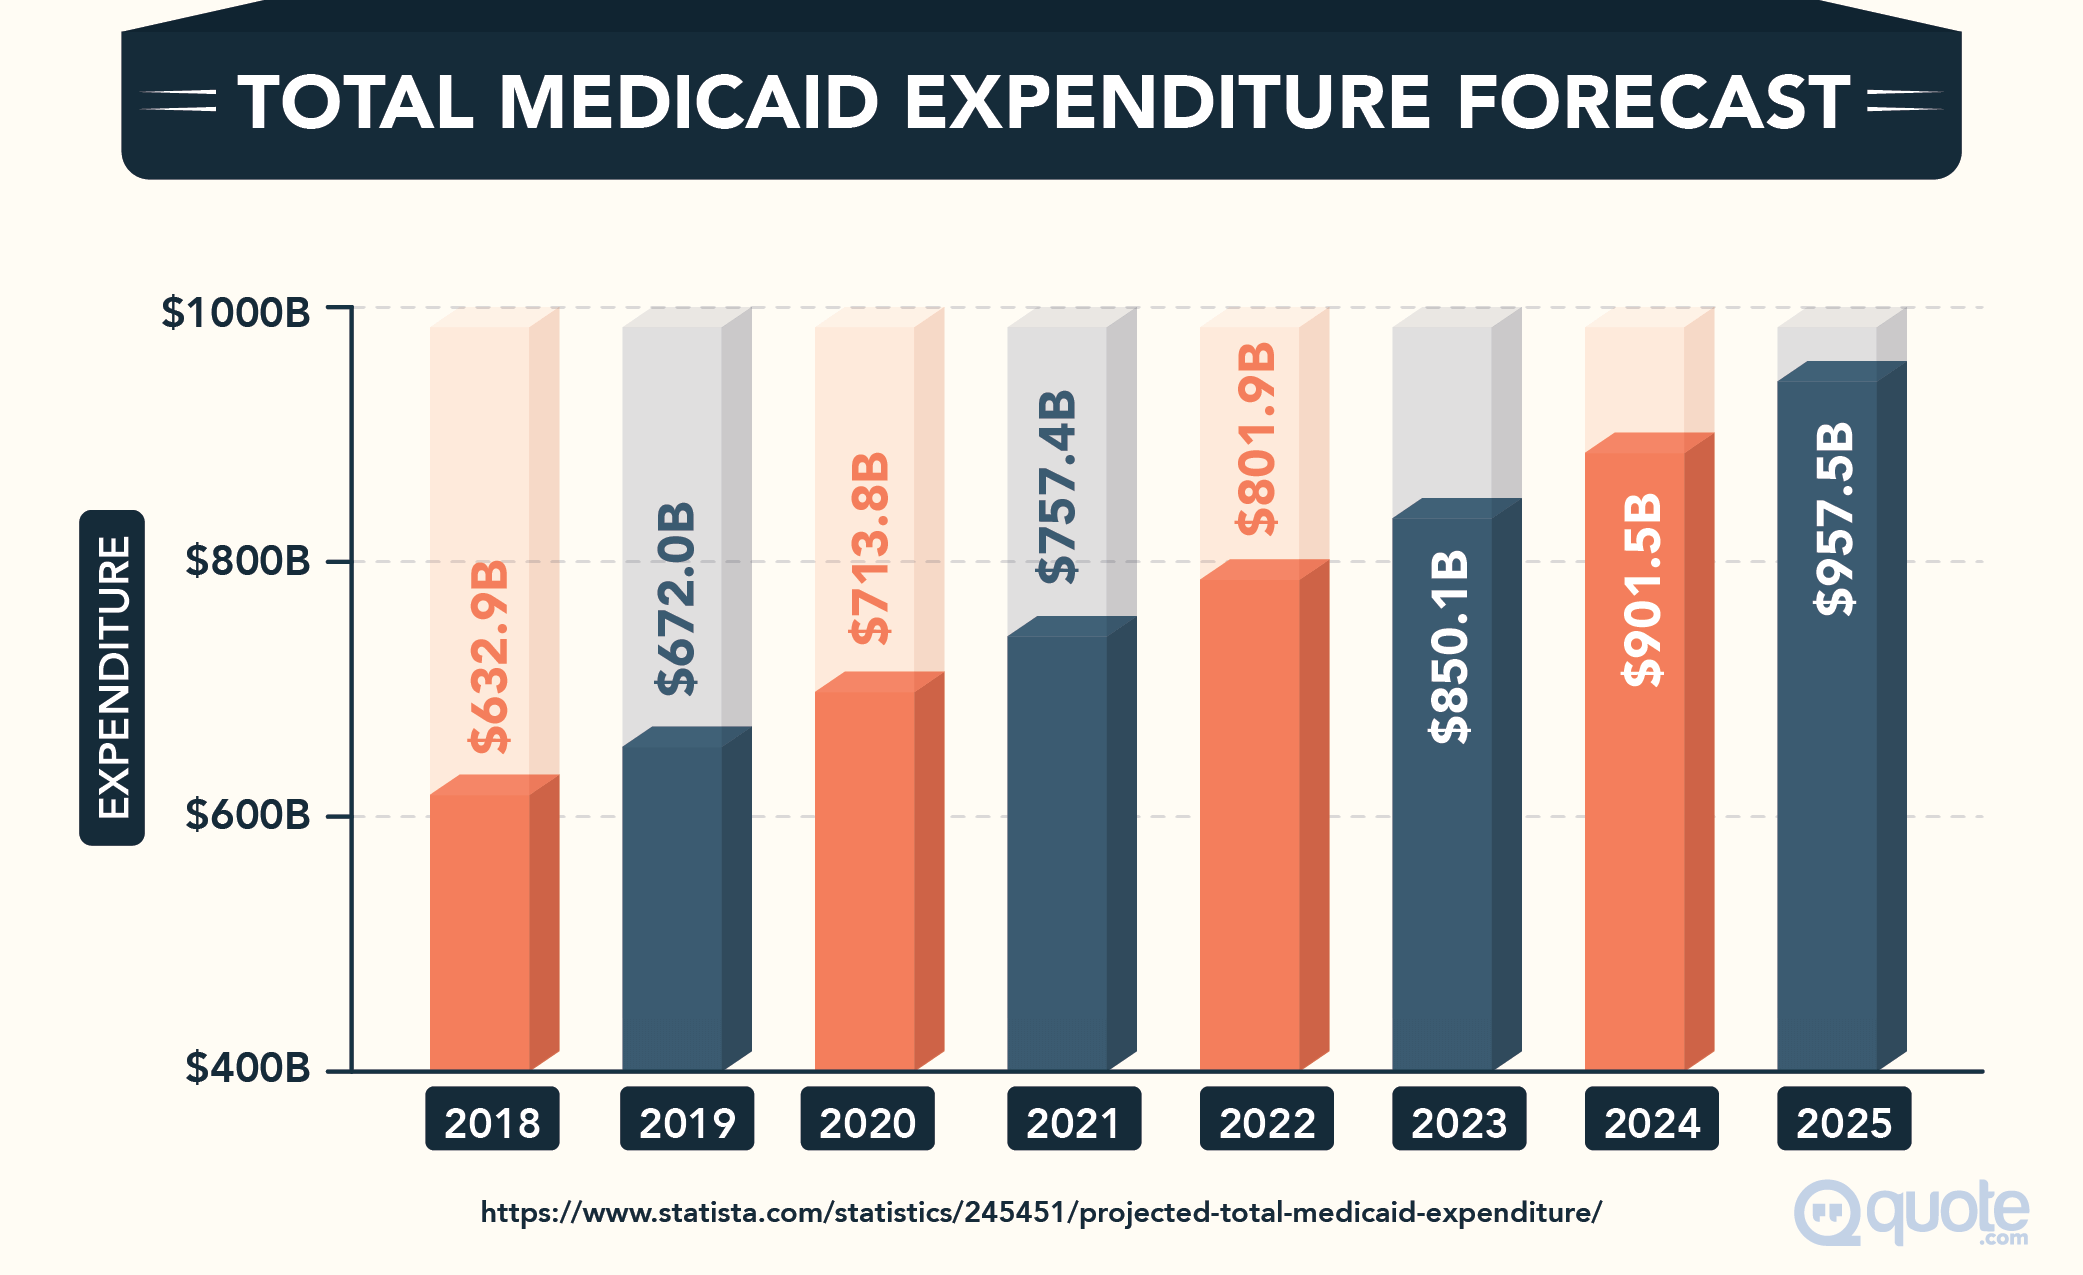 Total Medicaid Expenditure Forecast from 2018-2025